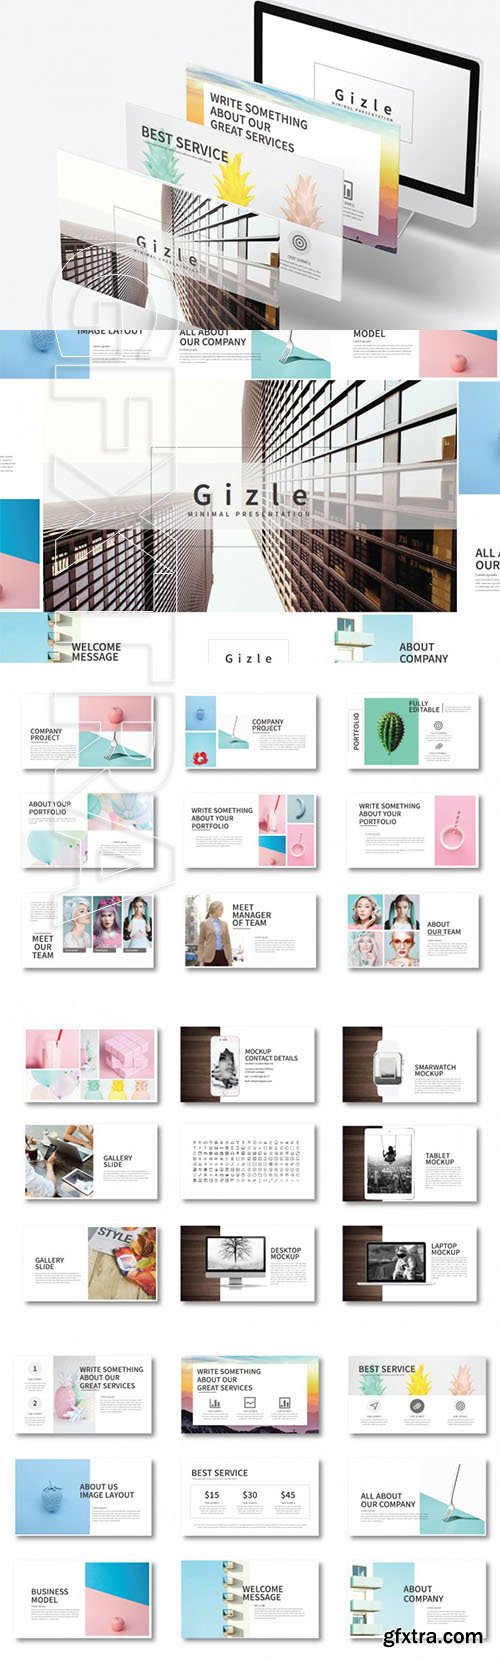 Gizle Powerpoint Template